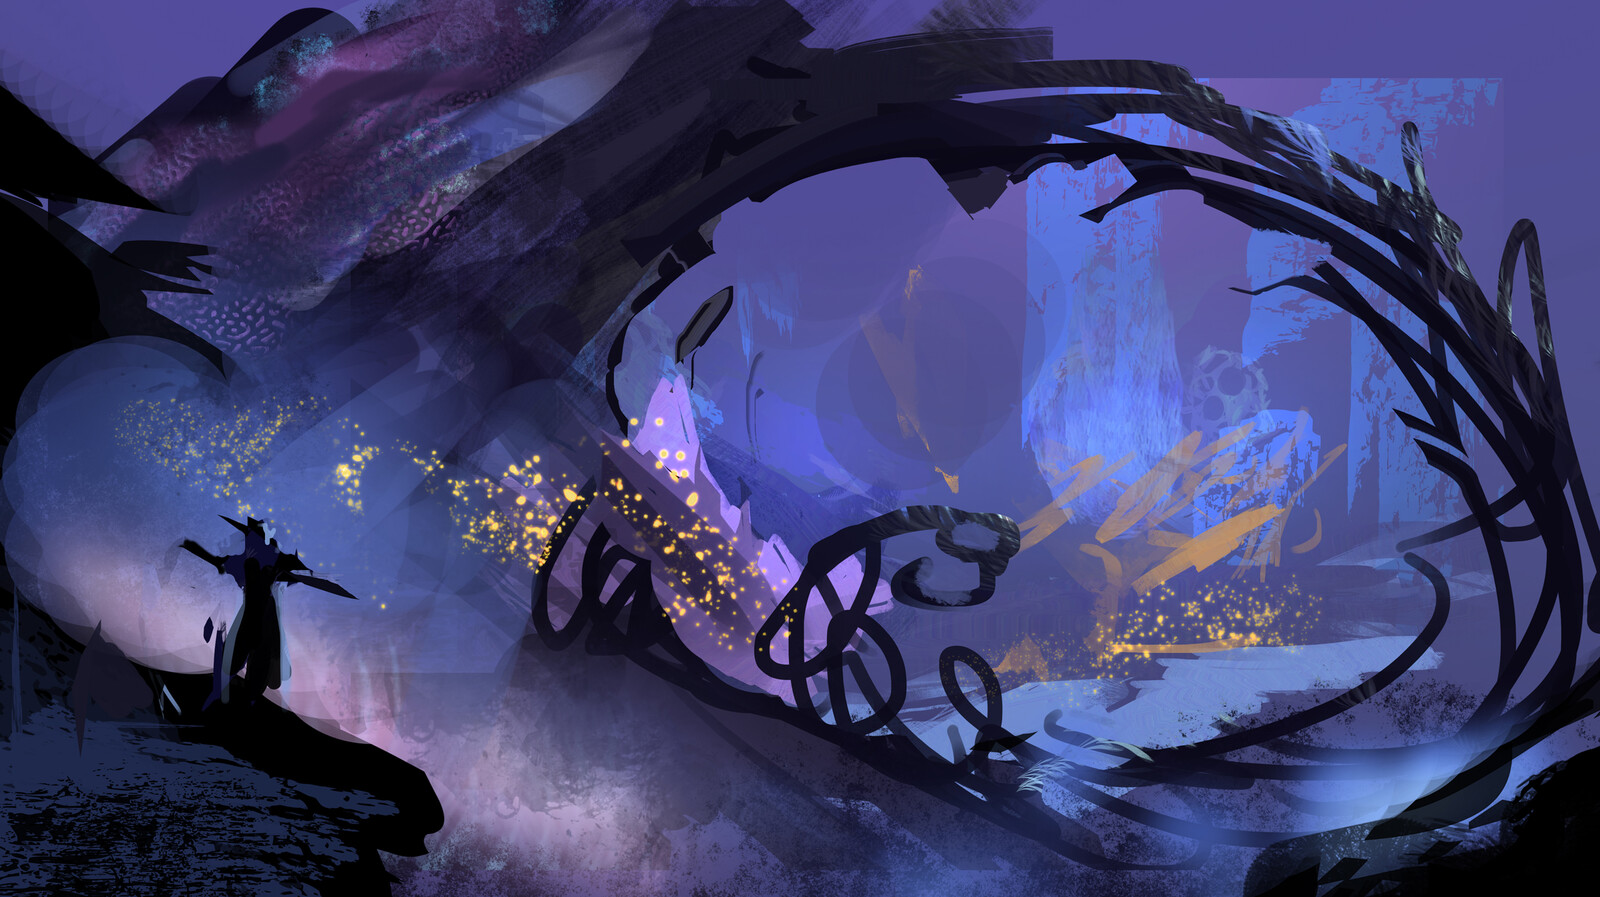 Thumbnail - one of the ideas i had was a rotted dead tree that had been molded into an archway with the spore druids magic